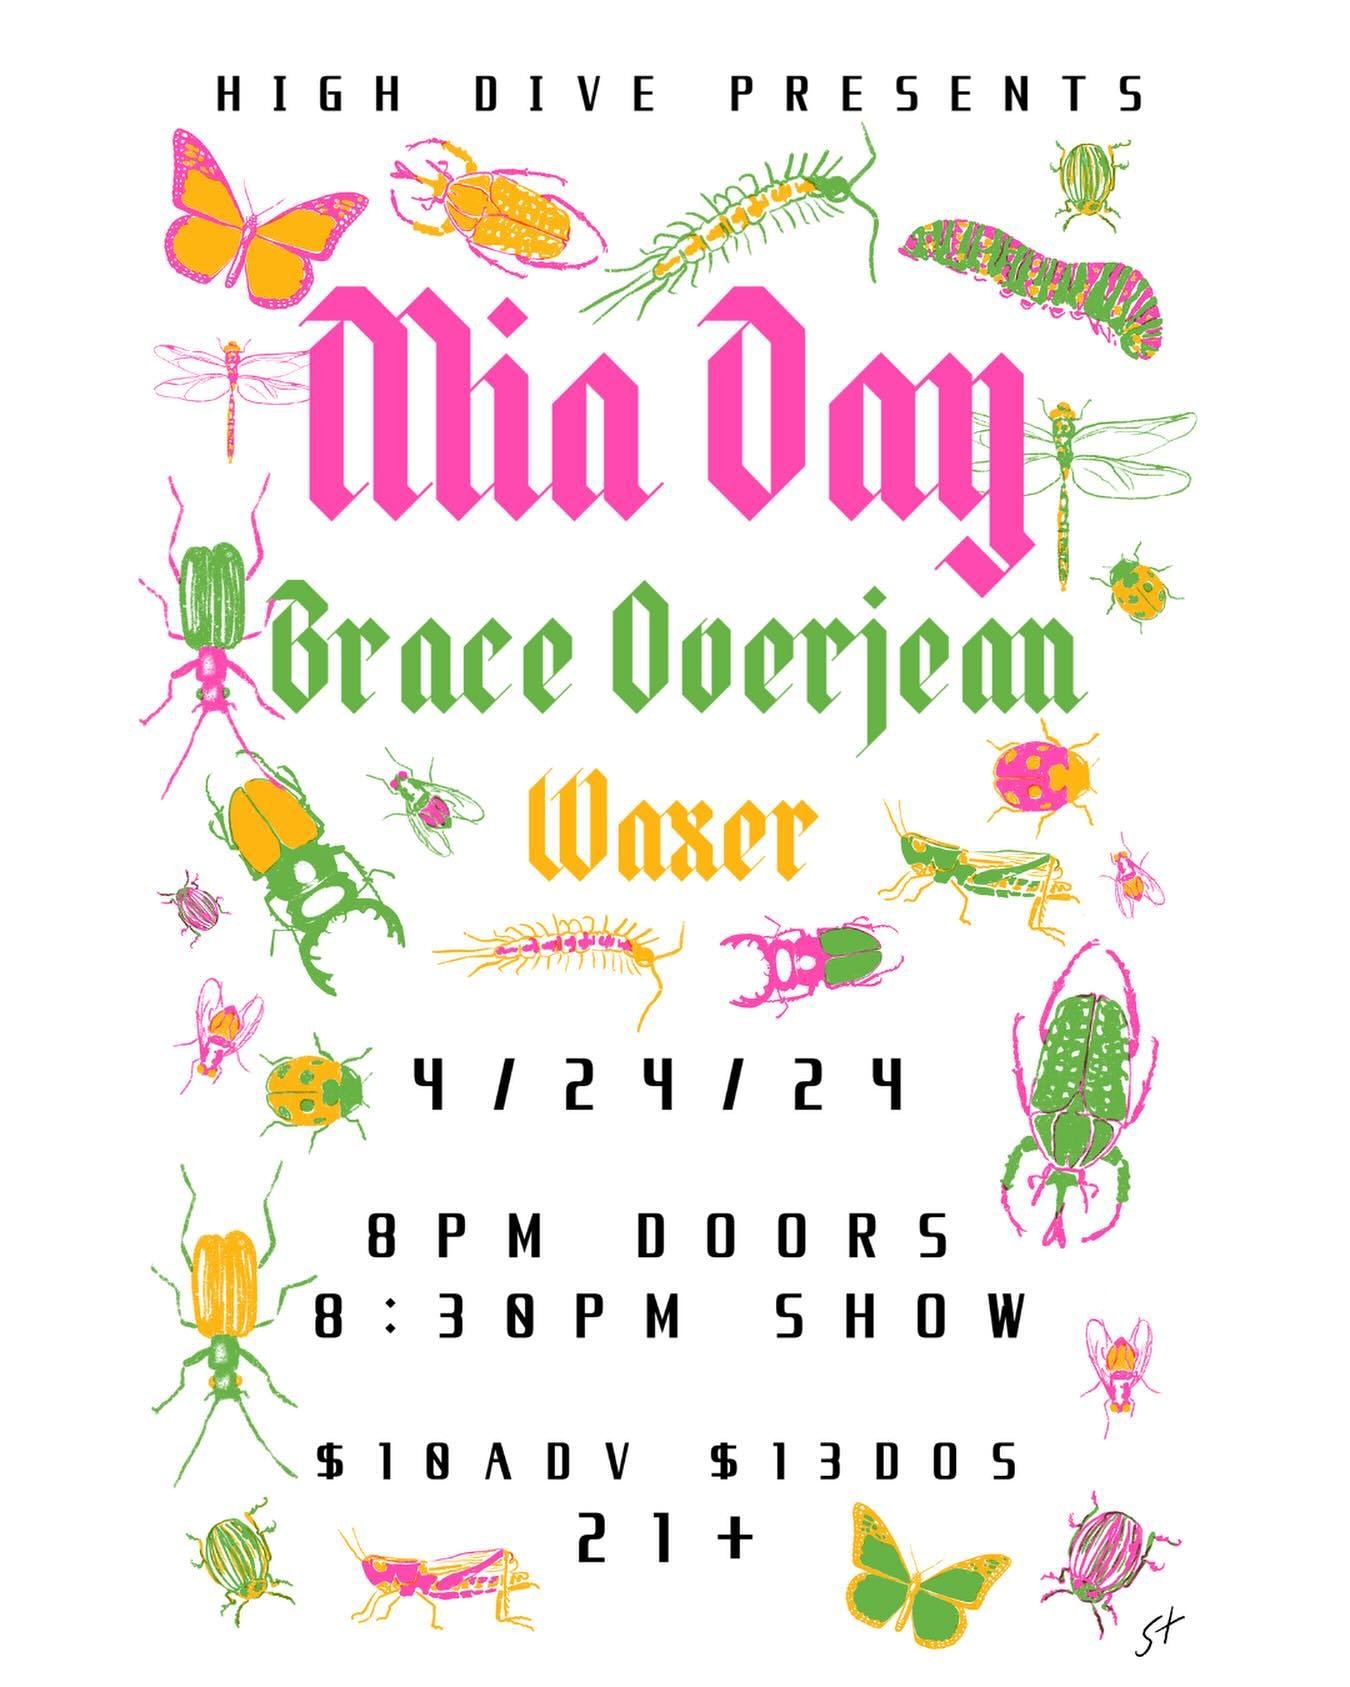 4/24 HIGH DIVE. With Brace Overjean and Waxer. 8pm, $10 advance tickets, $13 DOS. 21+. Can&rsquo;t wait to headline high dive this week, can&rsquo;t wait to see you there 🐛🪲🐞ticket link in bio 
. 
Amazing poster by @pwrpuff_gal